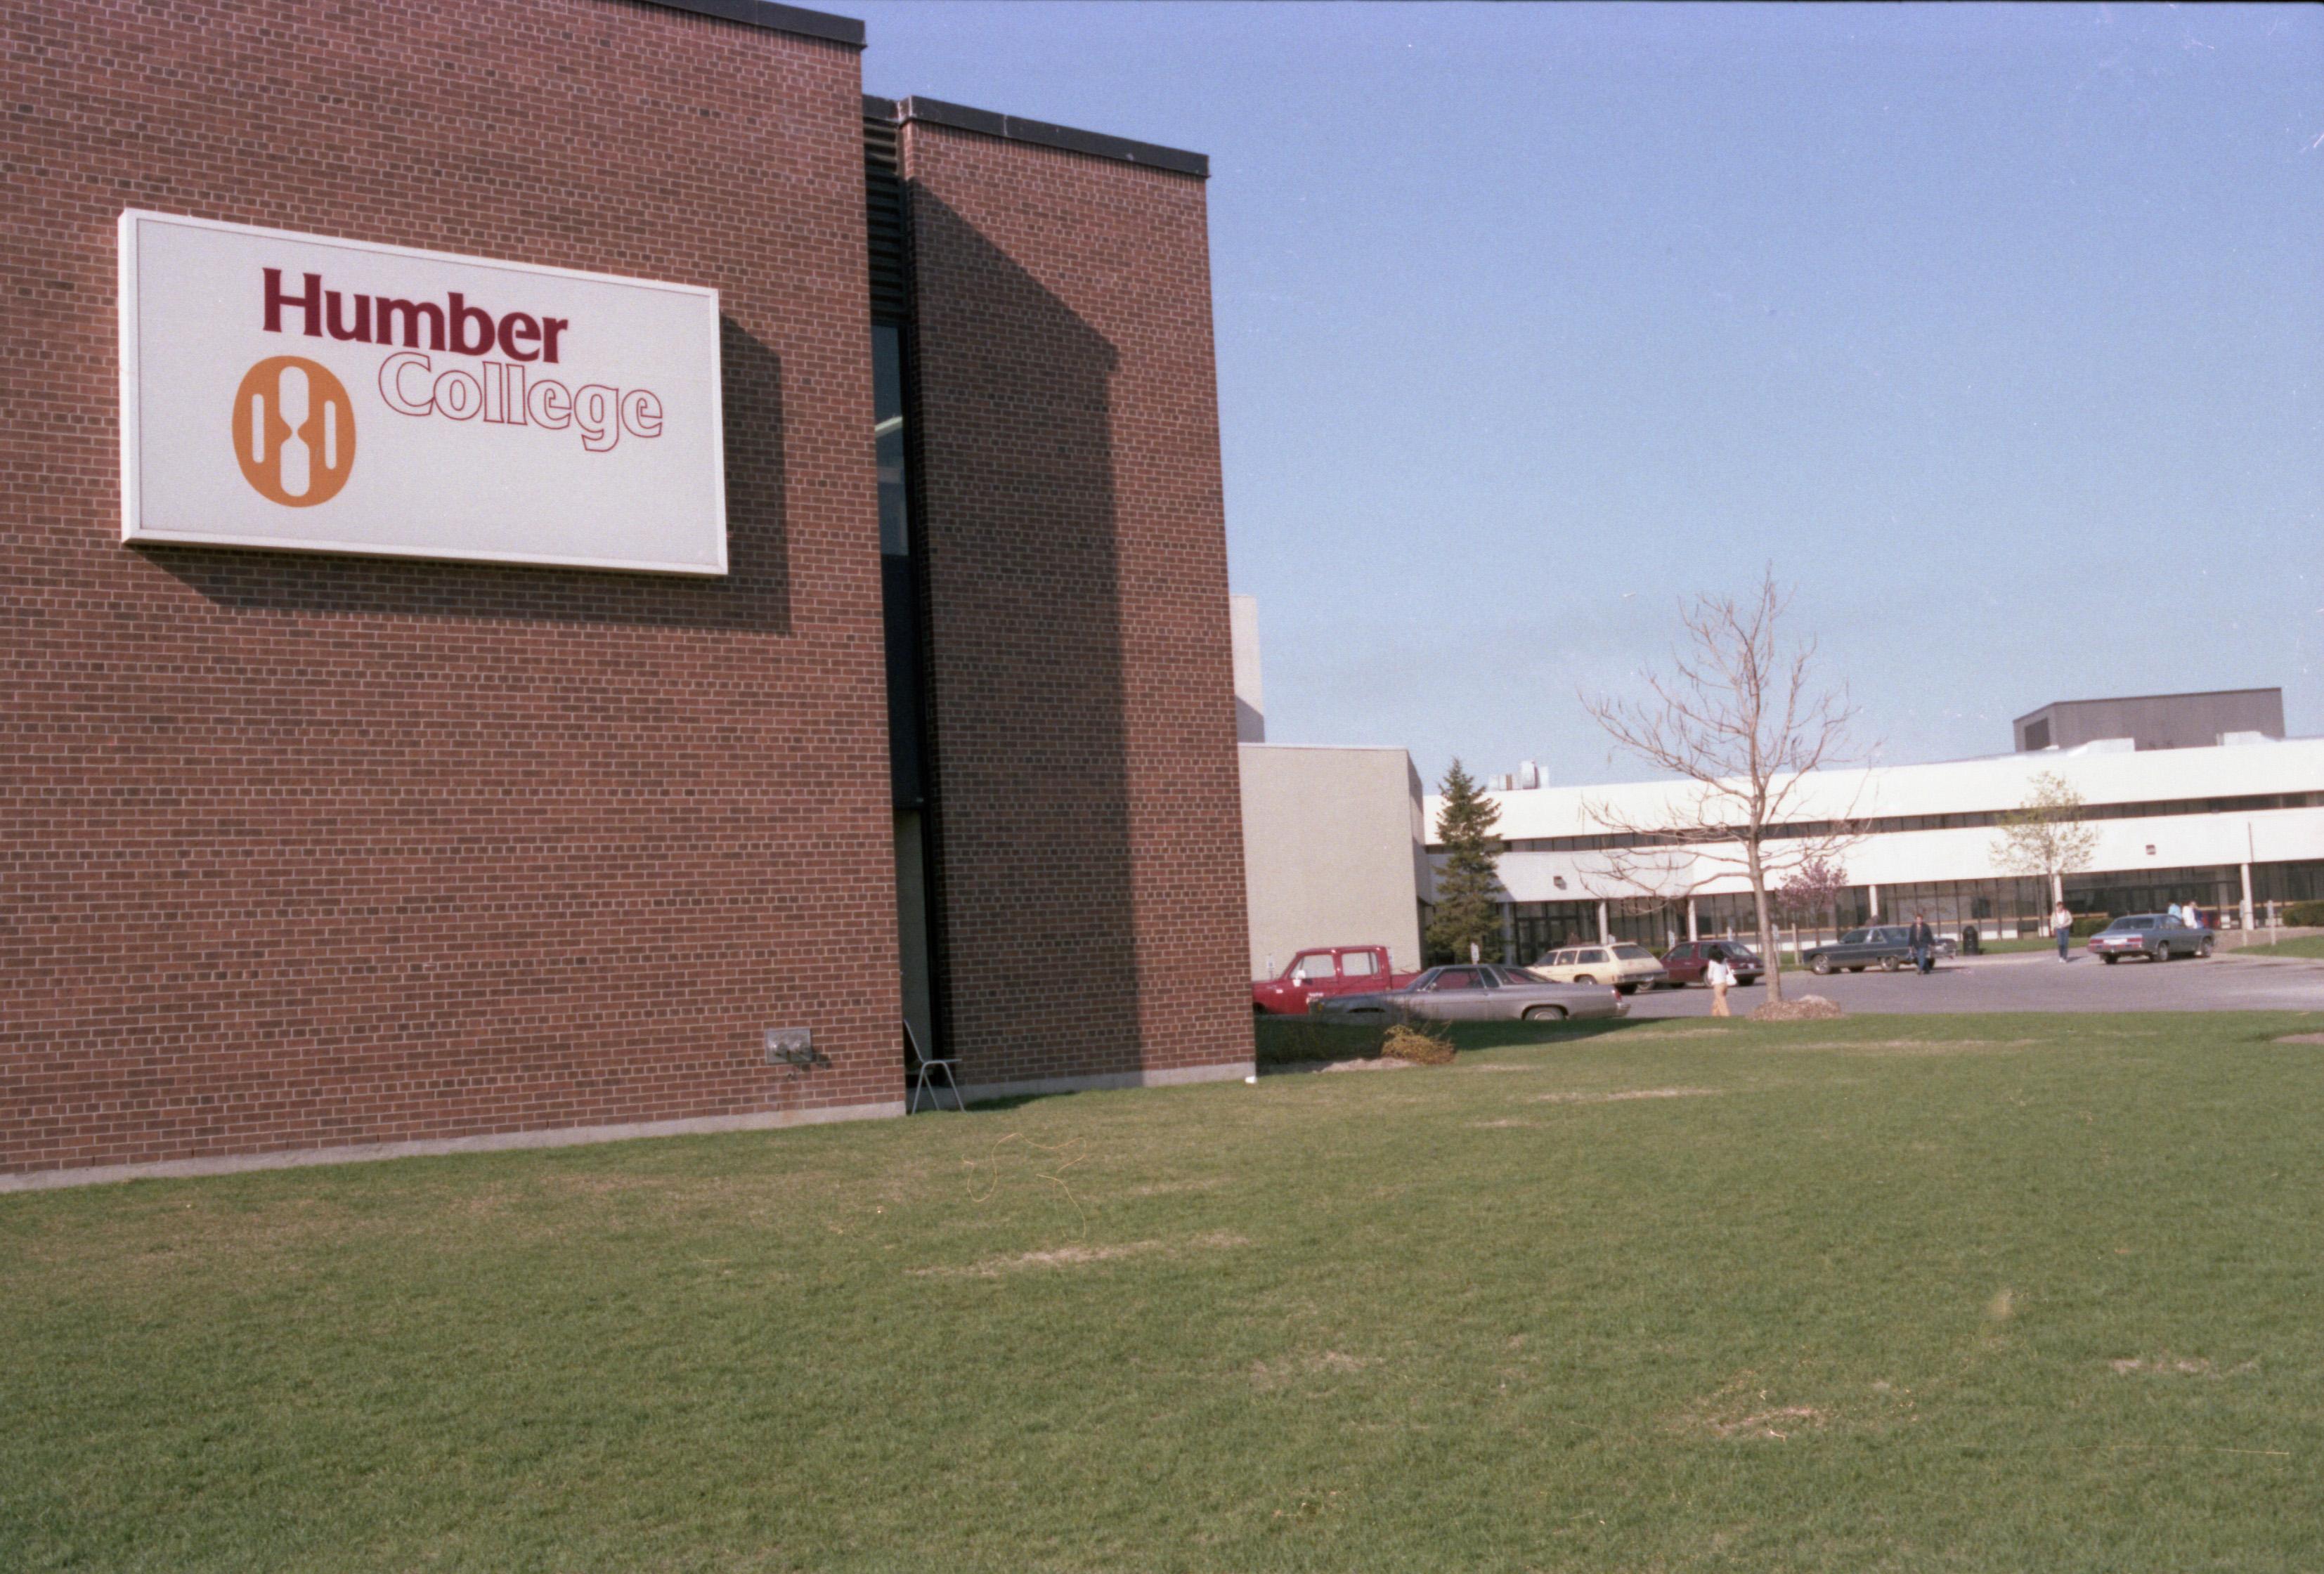 A picture of Humber College’s first logo on the side of a building.